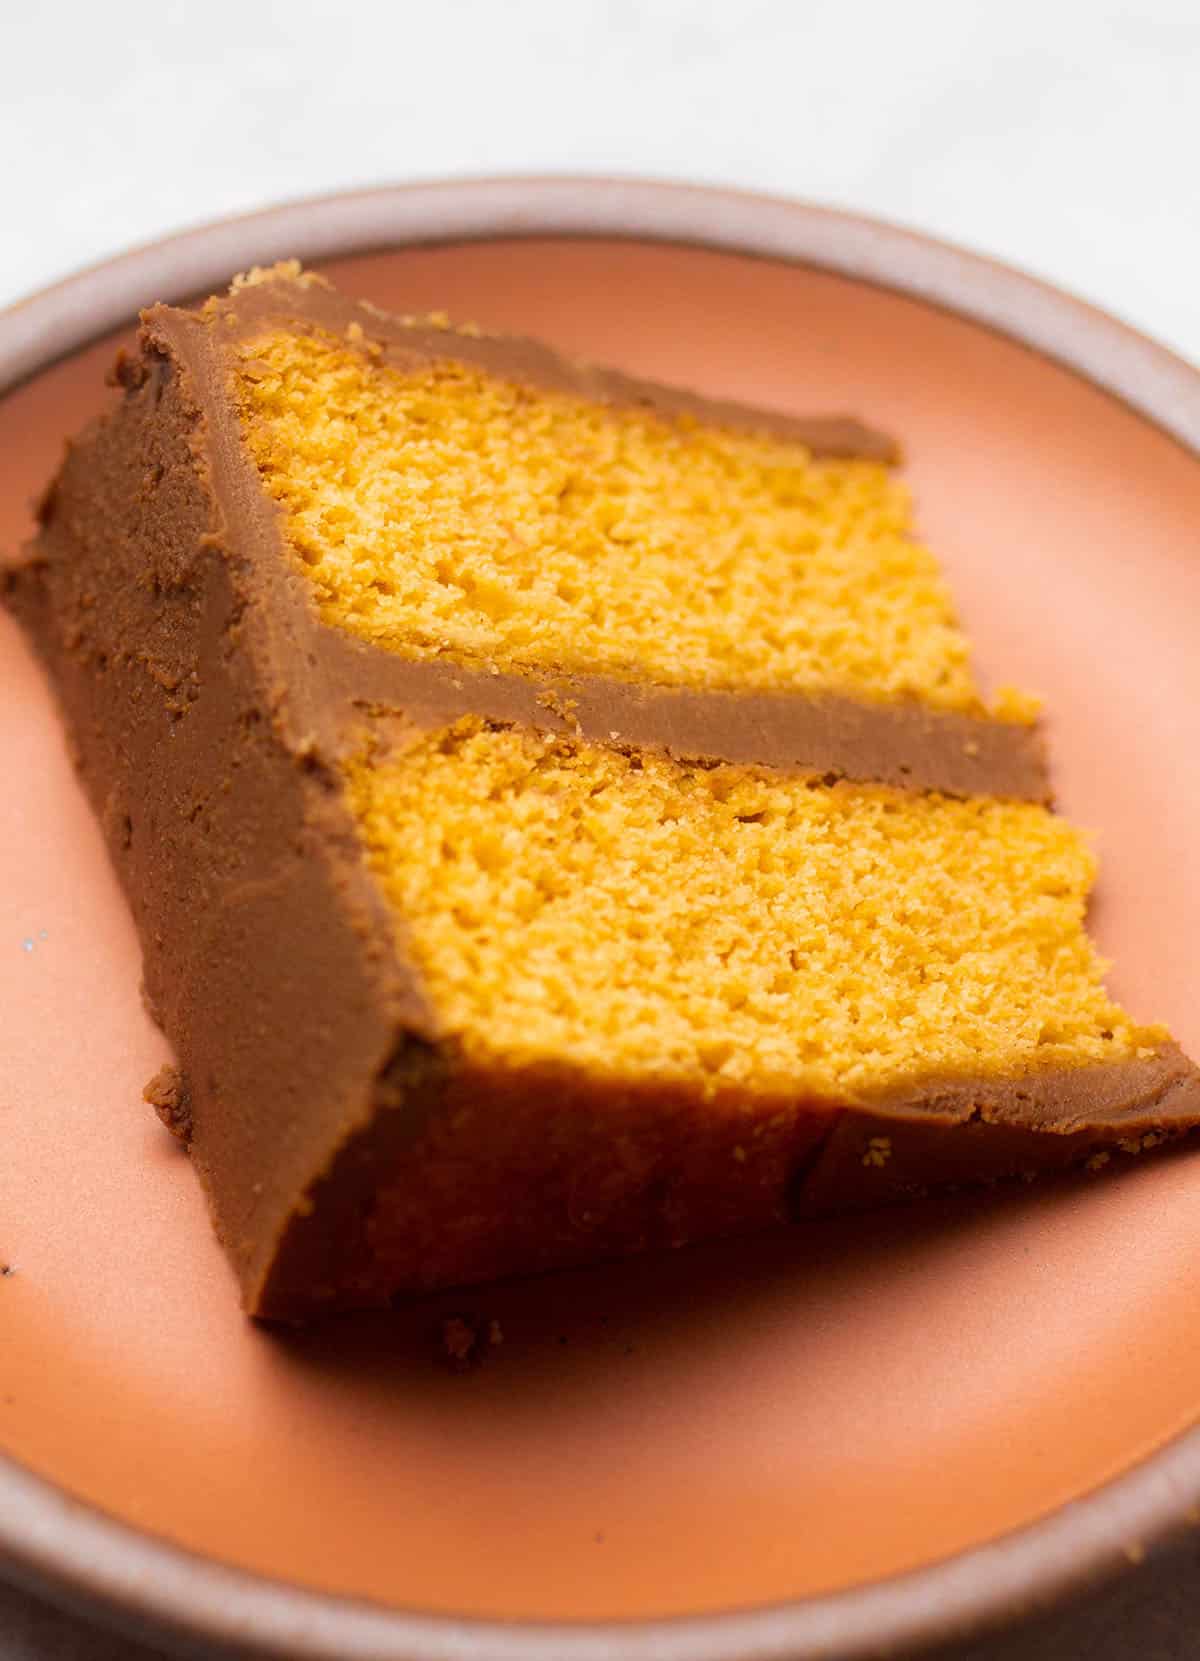 A slice of butterscotch cake on a small peach colored plate.